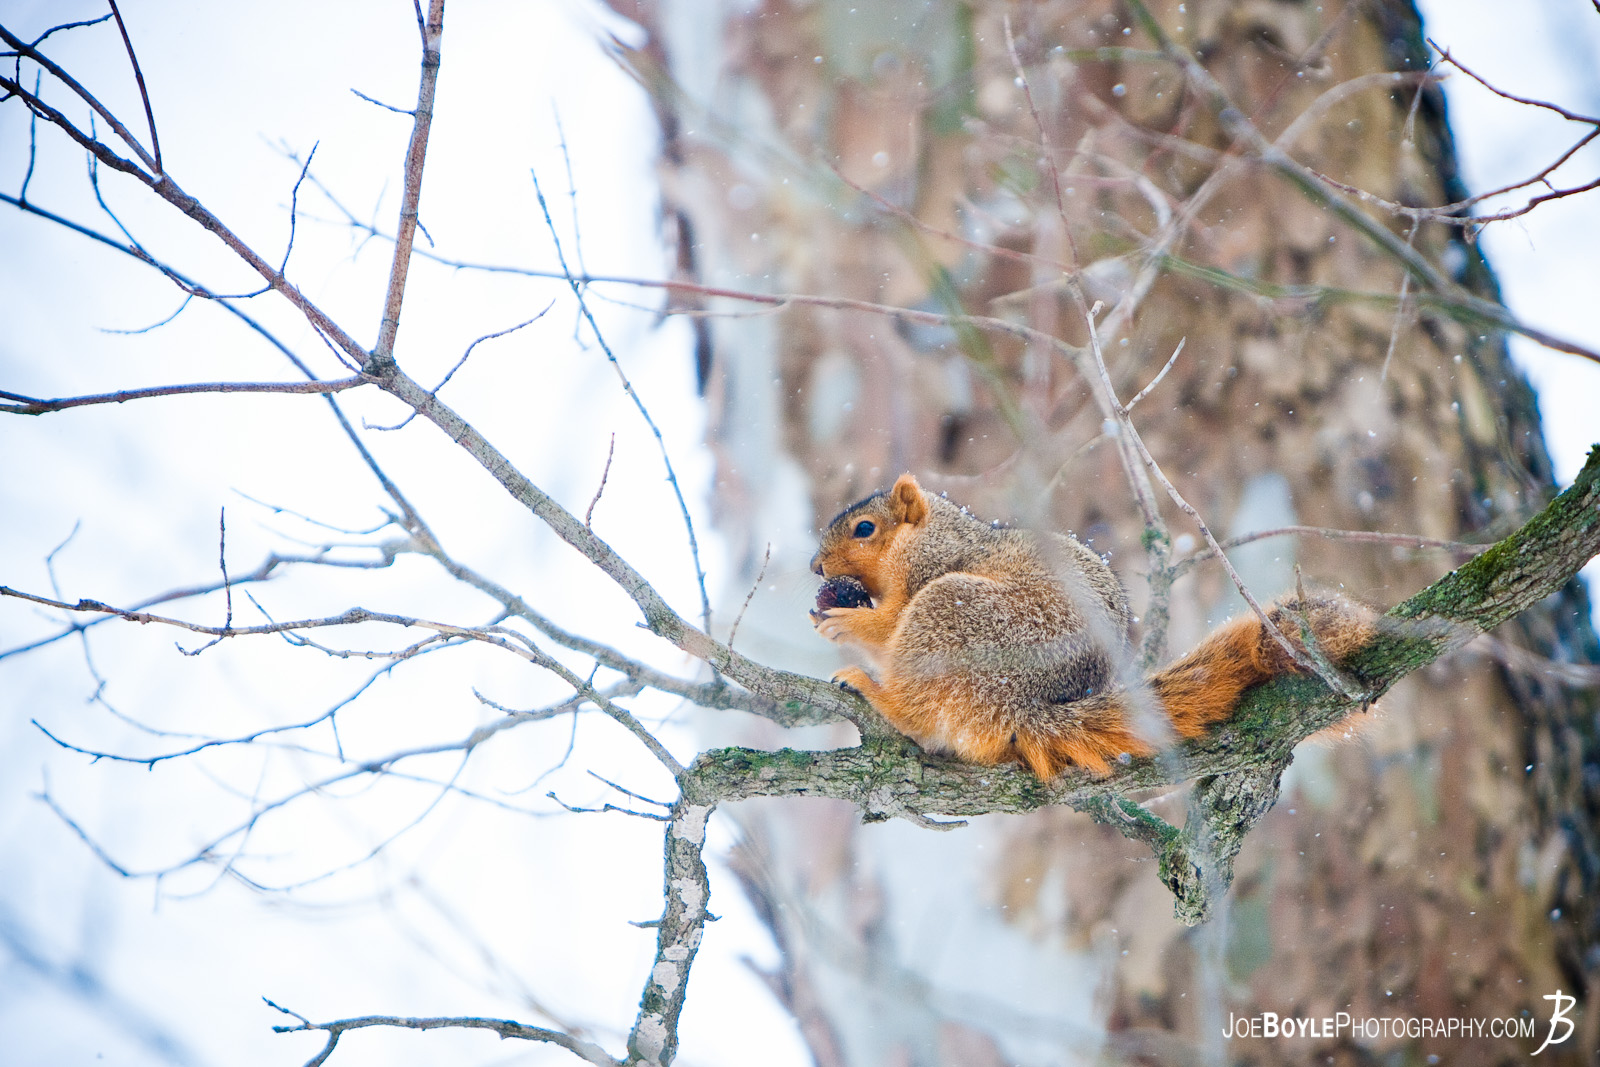  I captured a photo of this squirrel on a nice snowy day as I was hiking through the Cleveland Metroparks. 